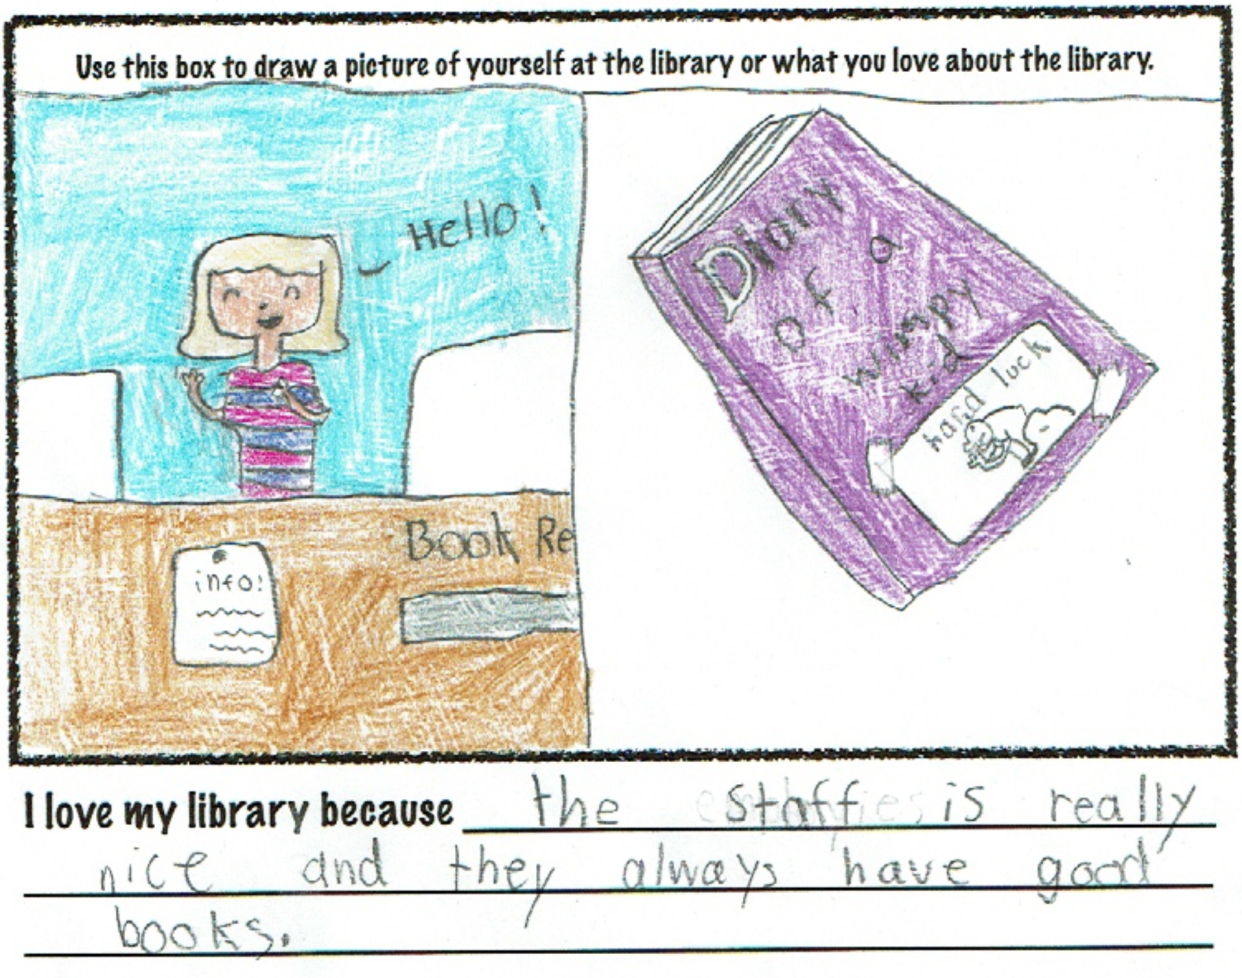 Audrey Soehnlen, daughter of Michael and Erica Soehnlen, illustrated her praise for the "really nice" library staff at the library where they "always have good books."